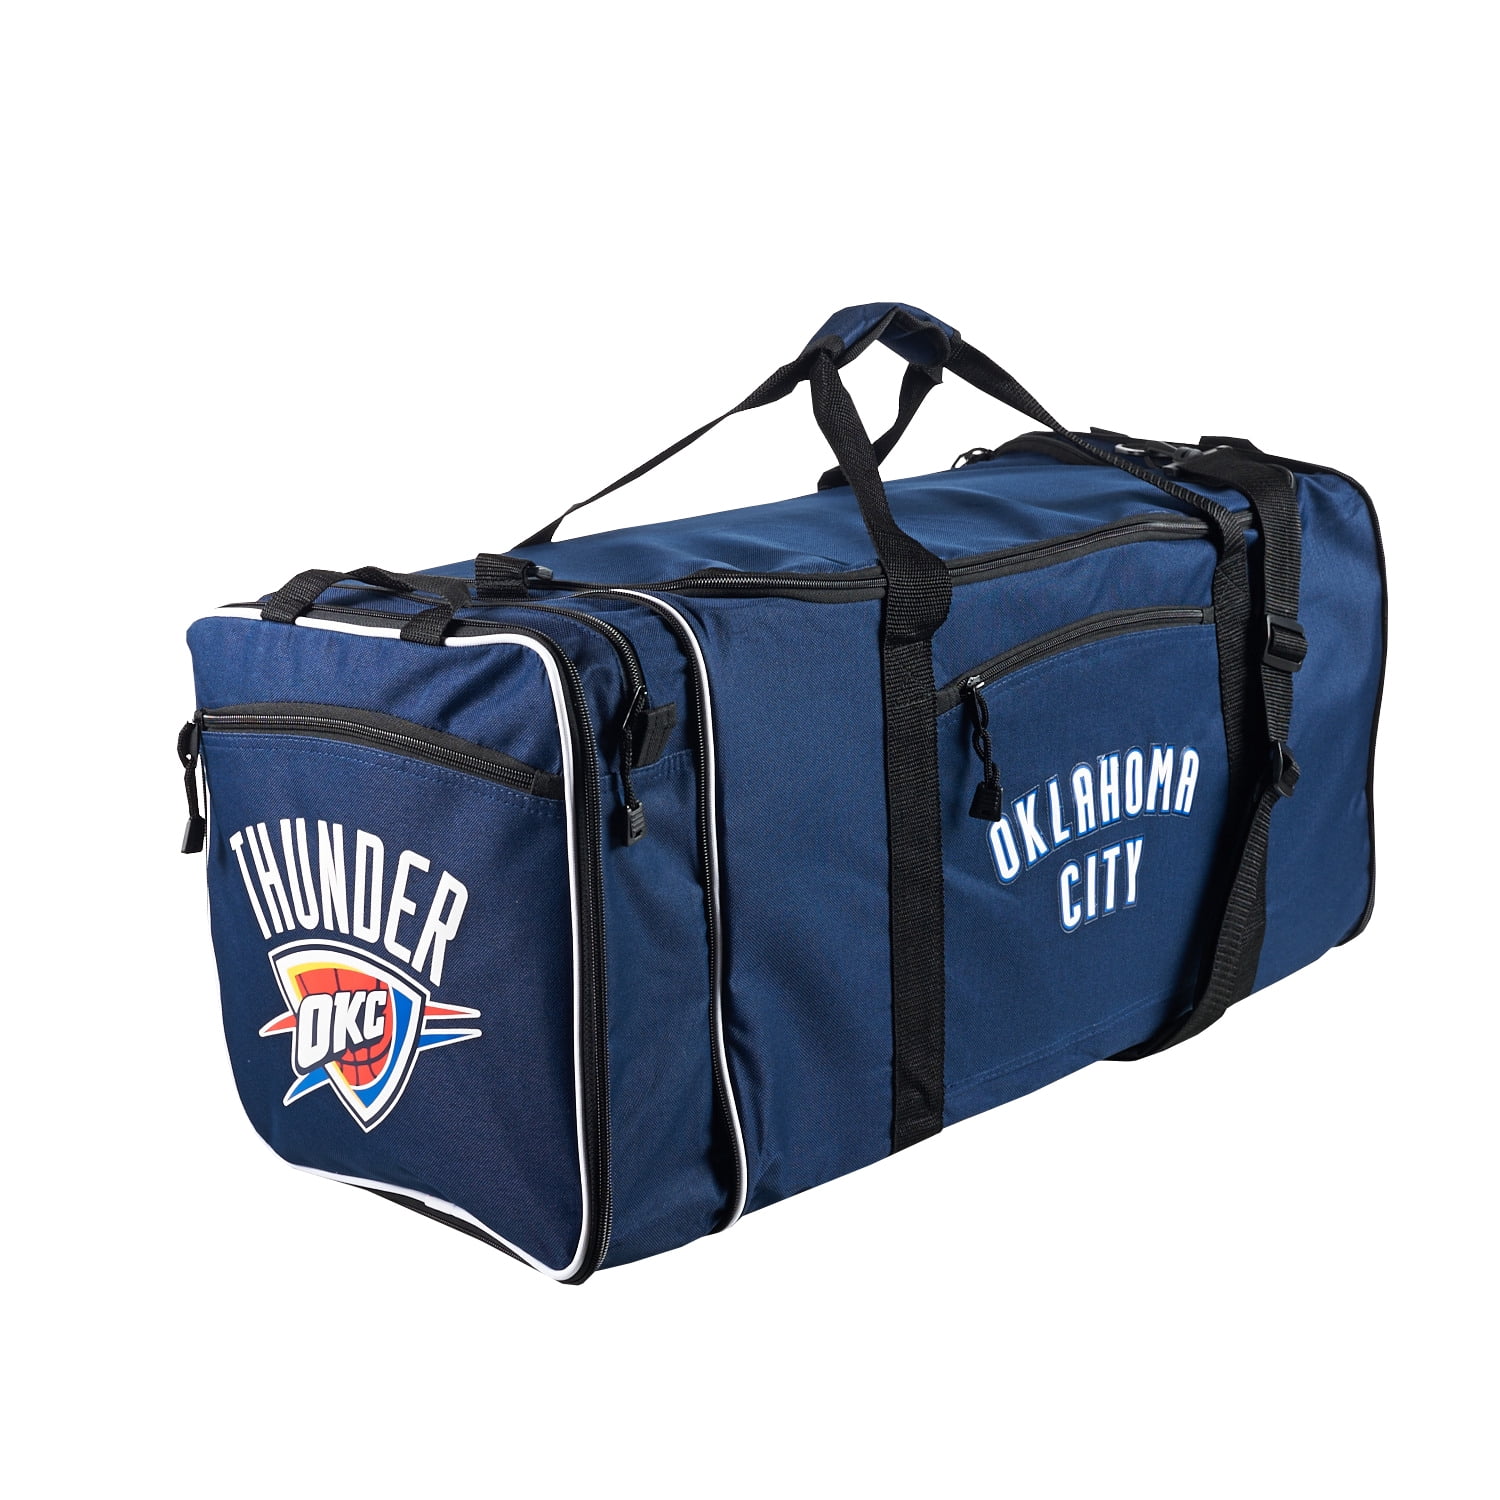 The Northwest Company Officially Licensed NCAA Wingman Duffel Bag 